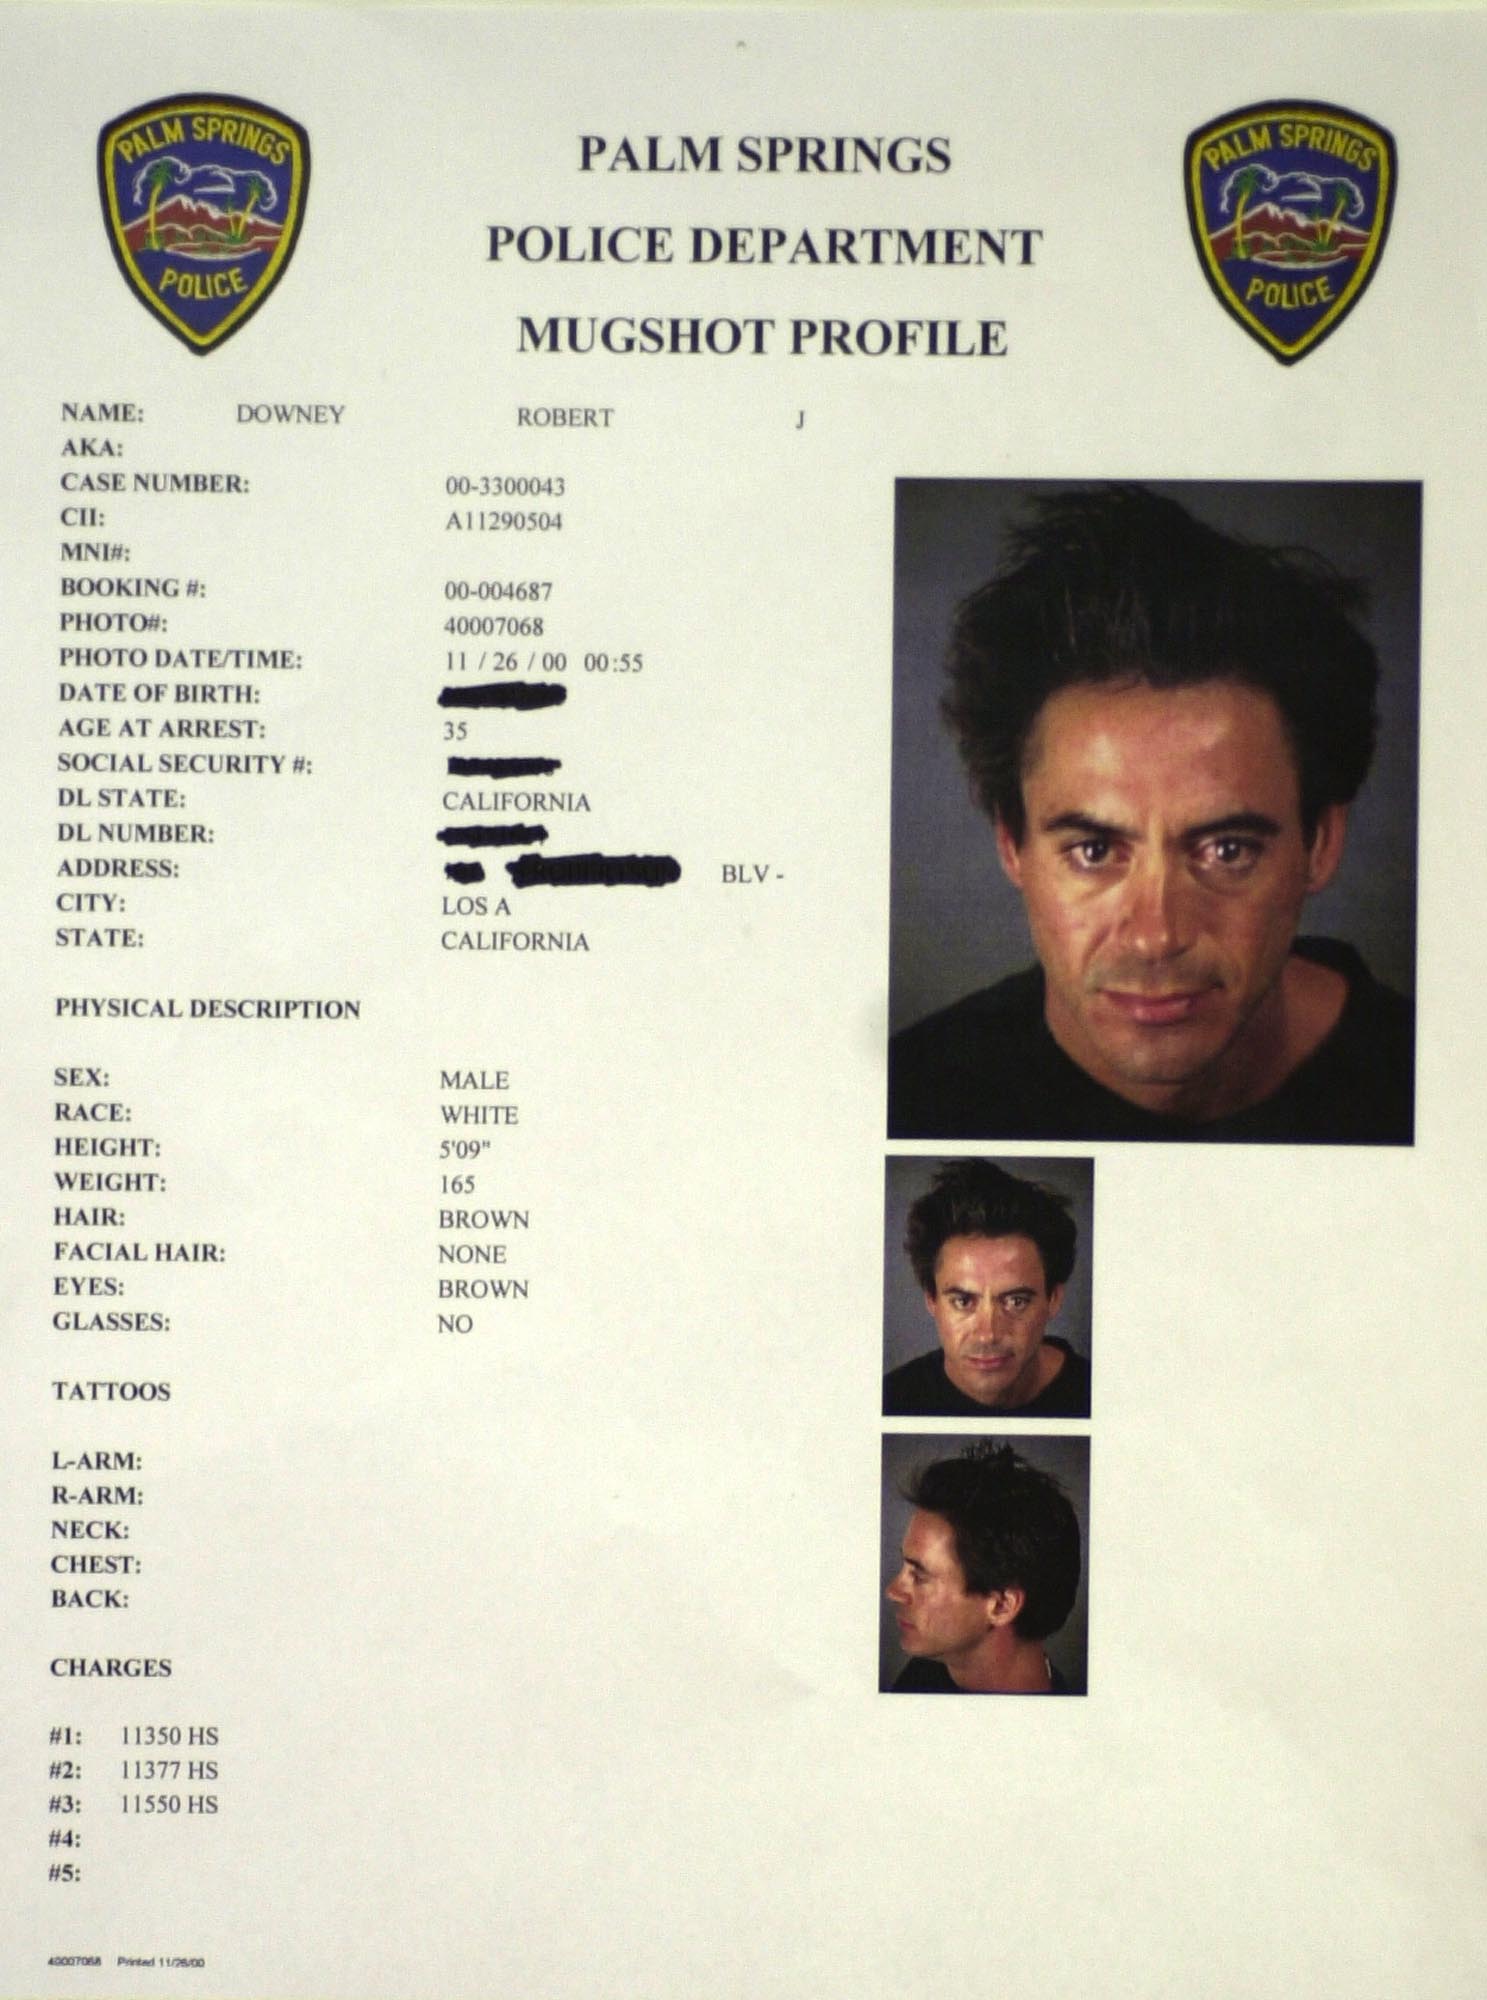 Robert Downey Jr.'s mugshot profile on November 25, 2000, after he was arrested at the Merv Griffin Resort in Palm Springs, California for drug possesion | Source: Getty Images